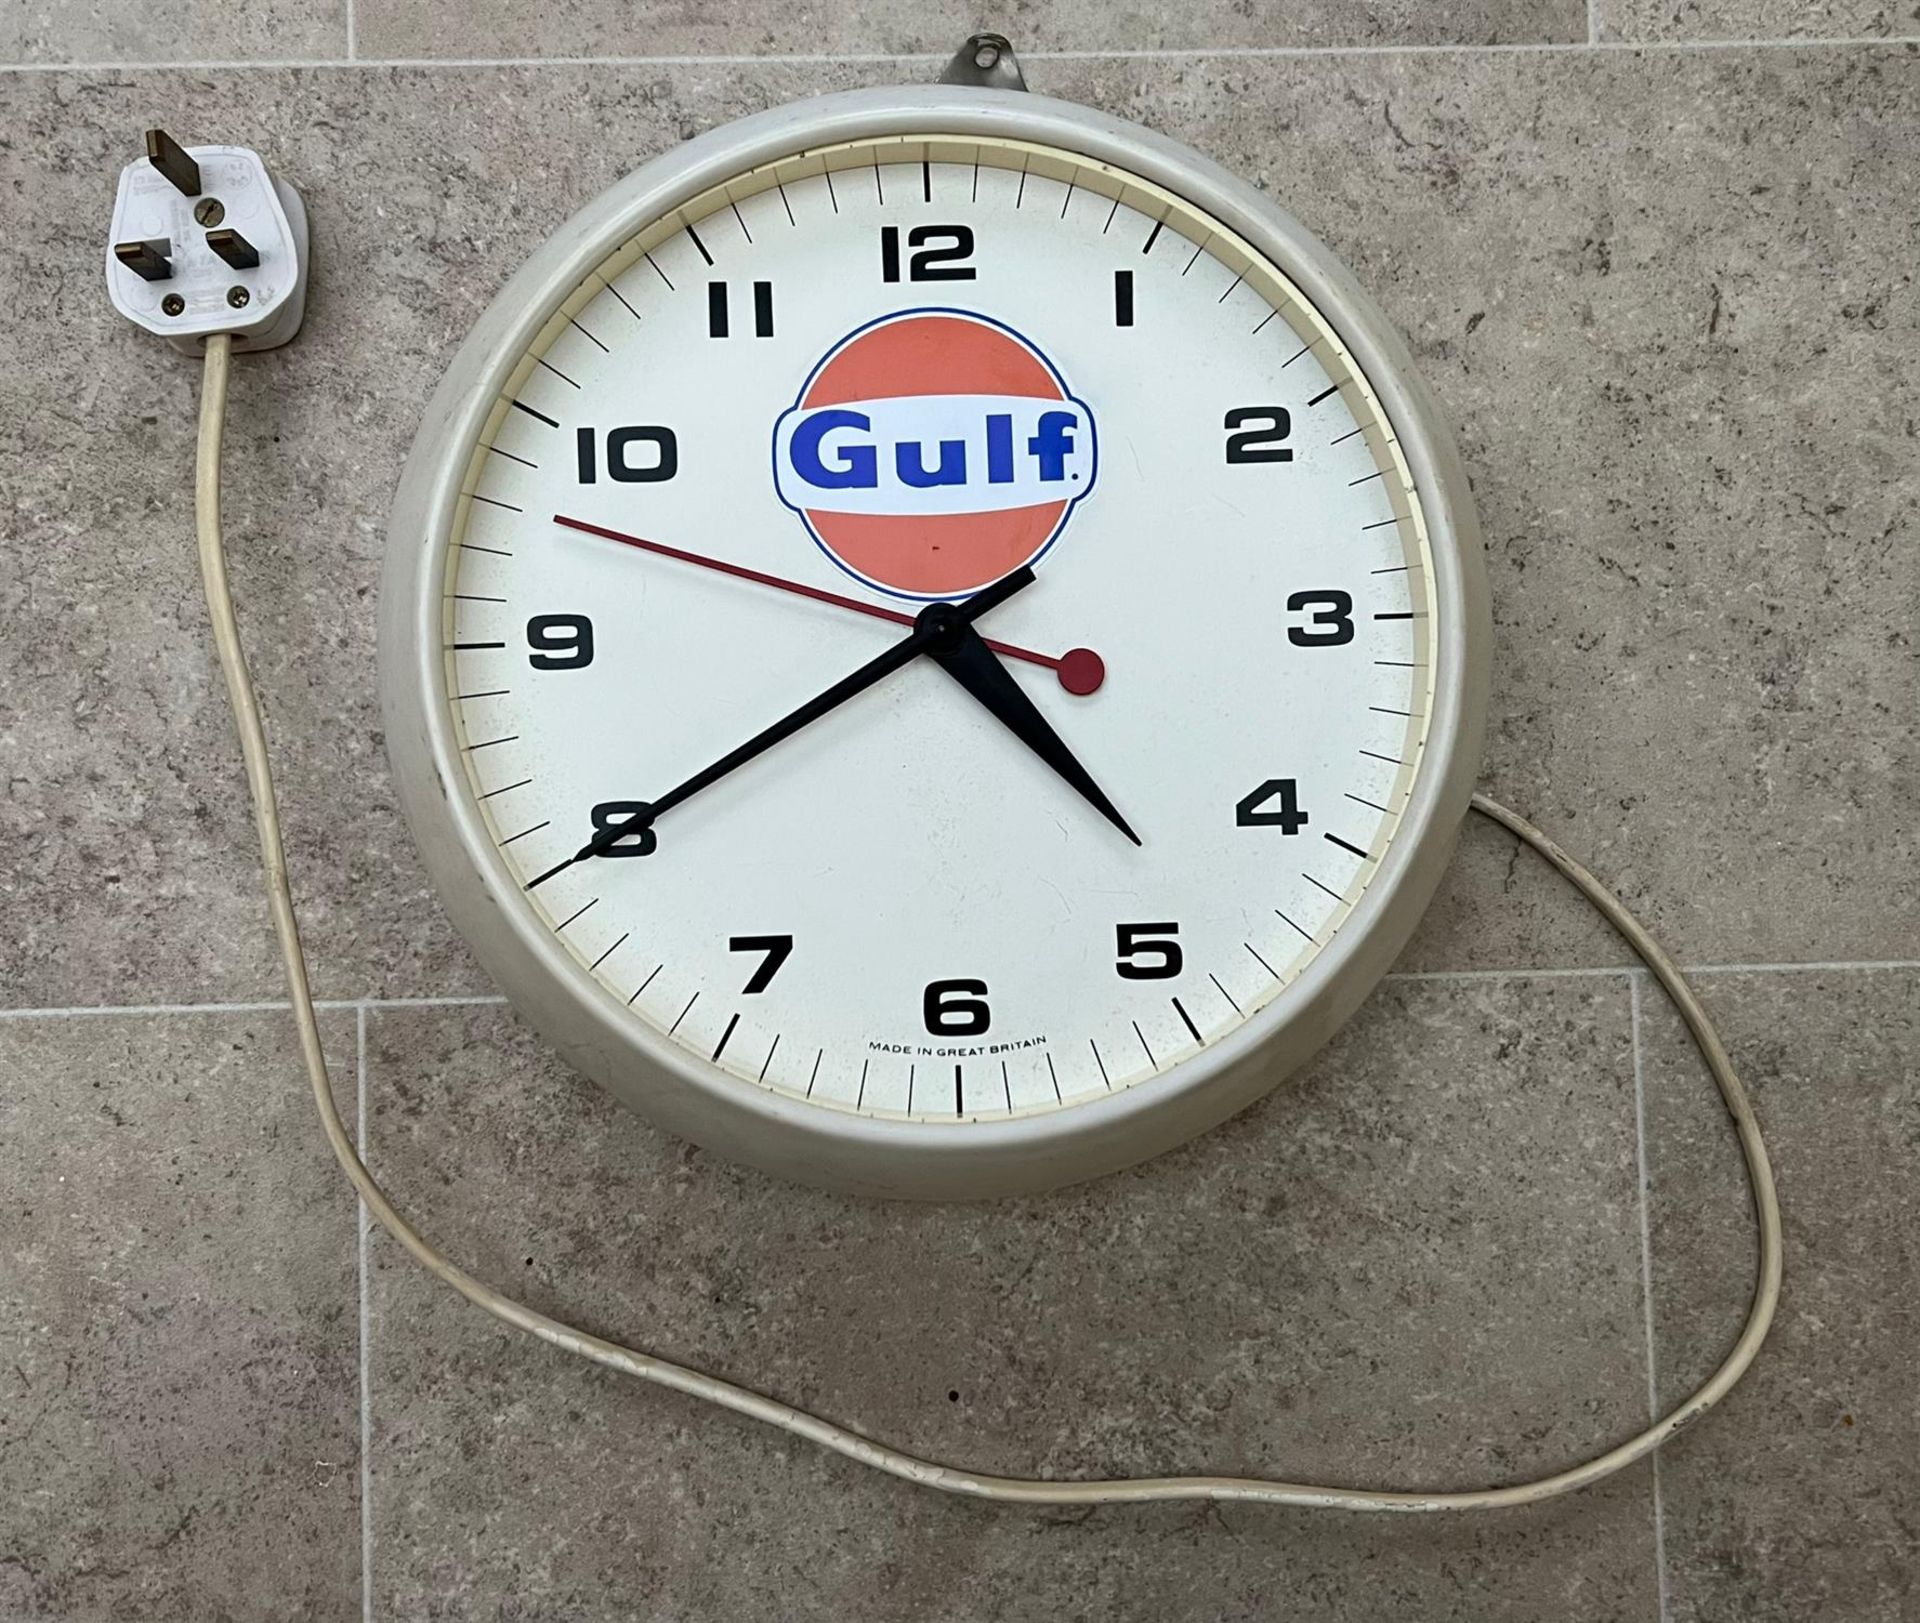 An Original Smiths 9" Gulf-Themed Wall Clock c.1970s - Image 2 of 8